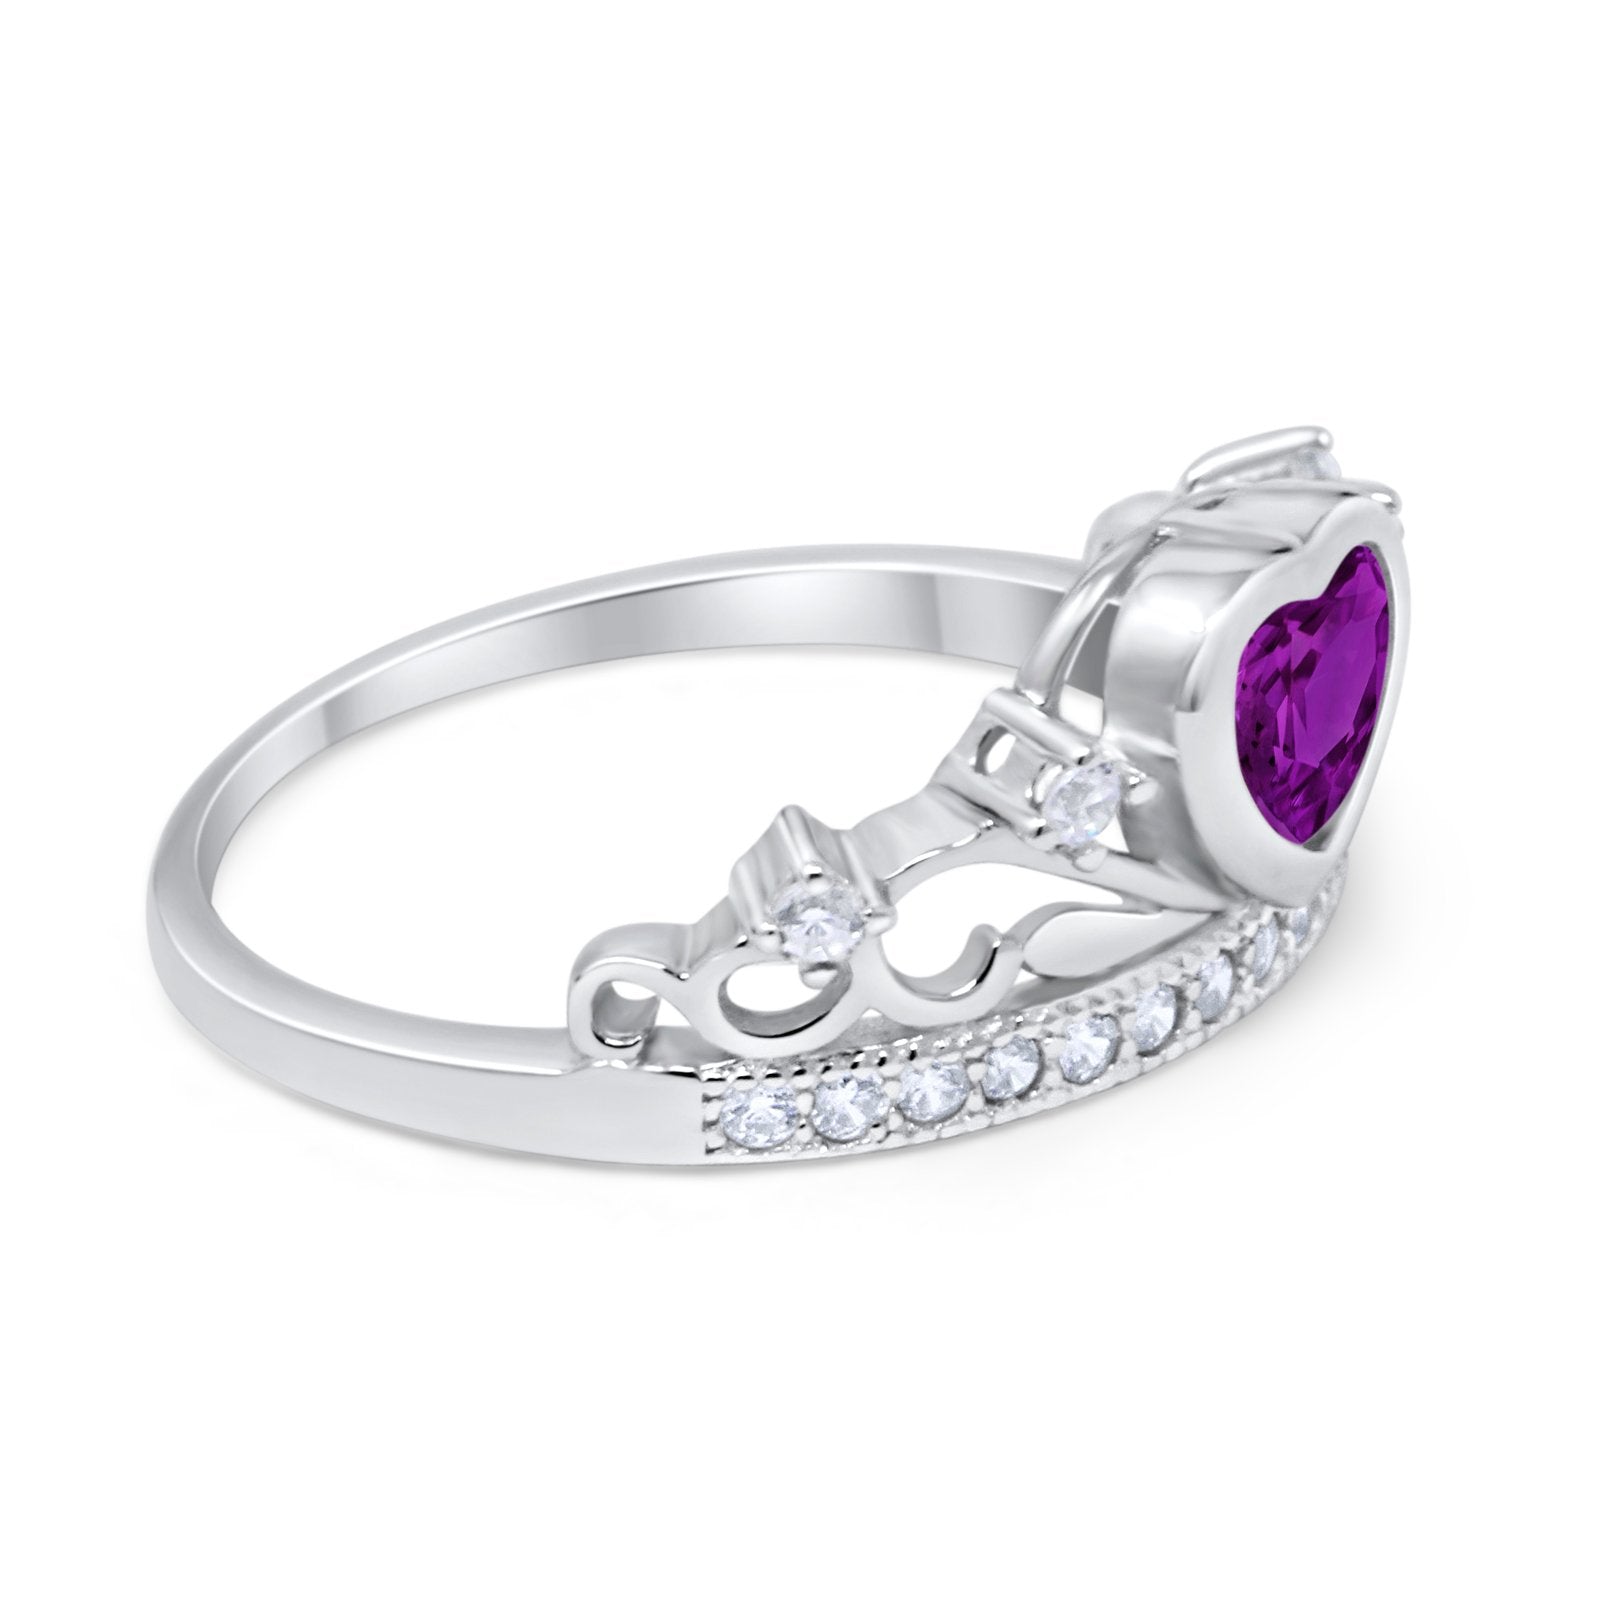 Heart Crown Ring Eternity Simulated Amethyst CZ 925 Sterling Silver